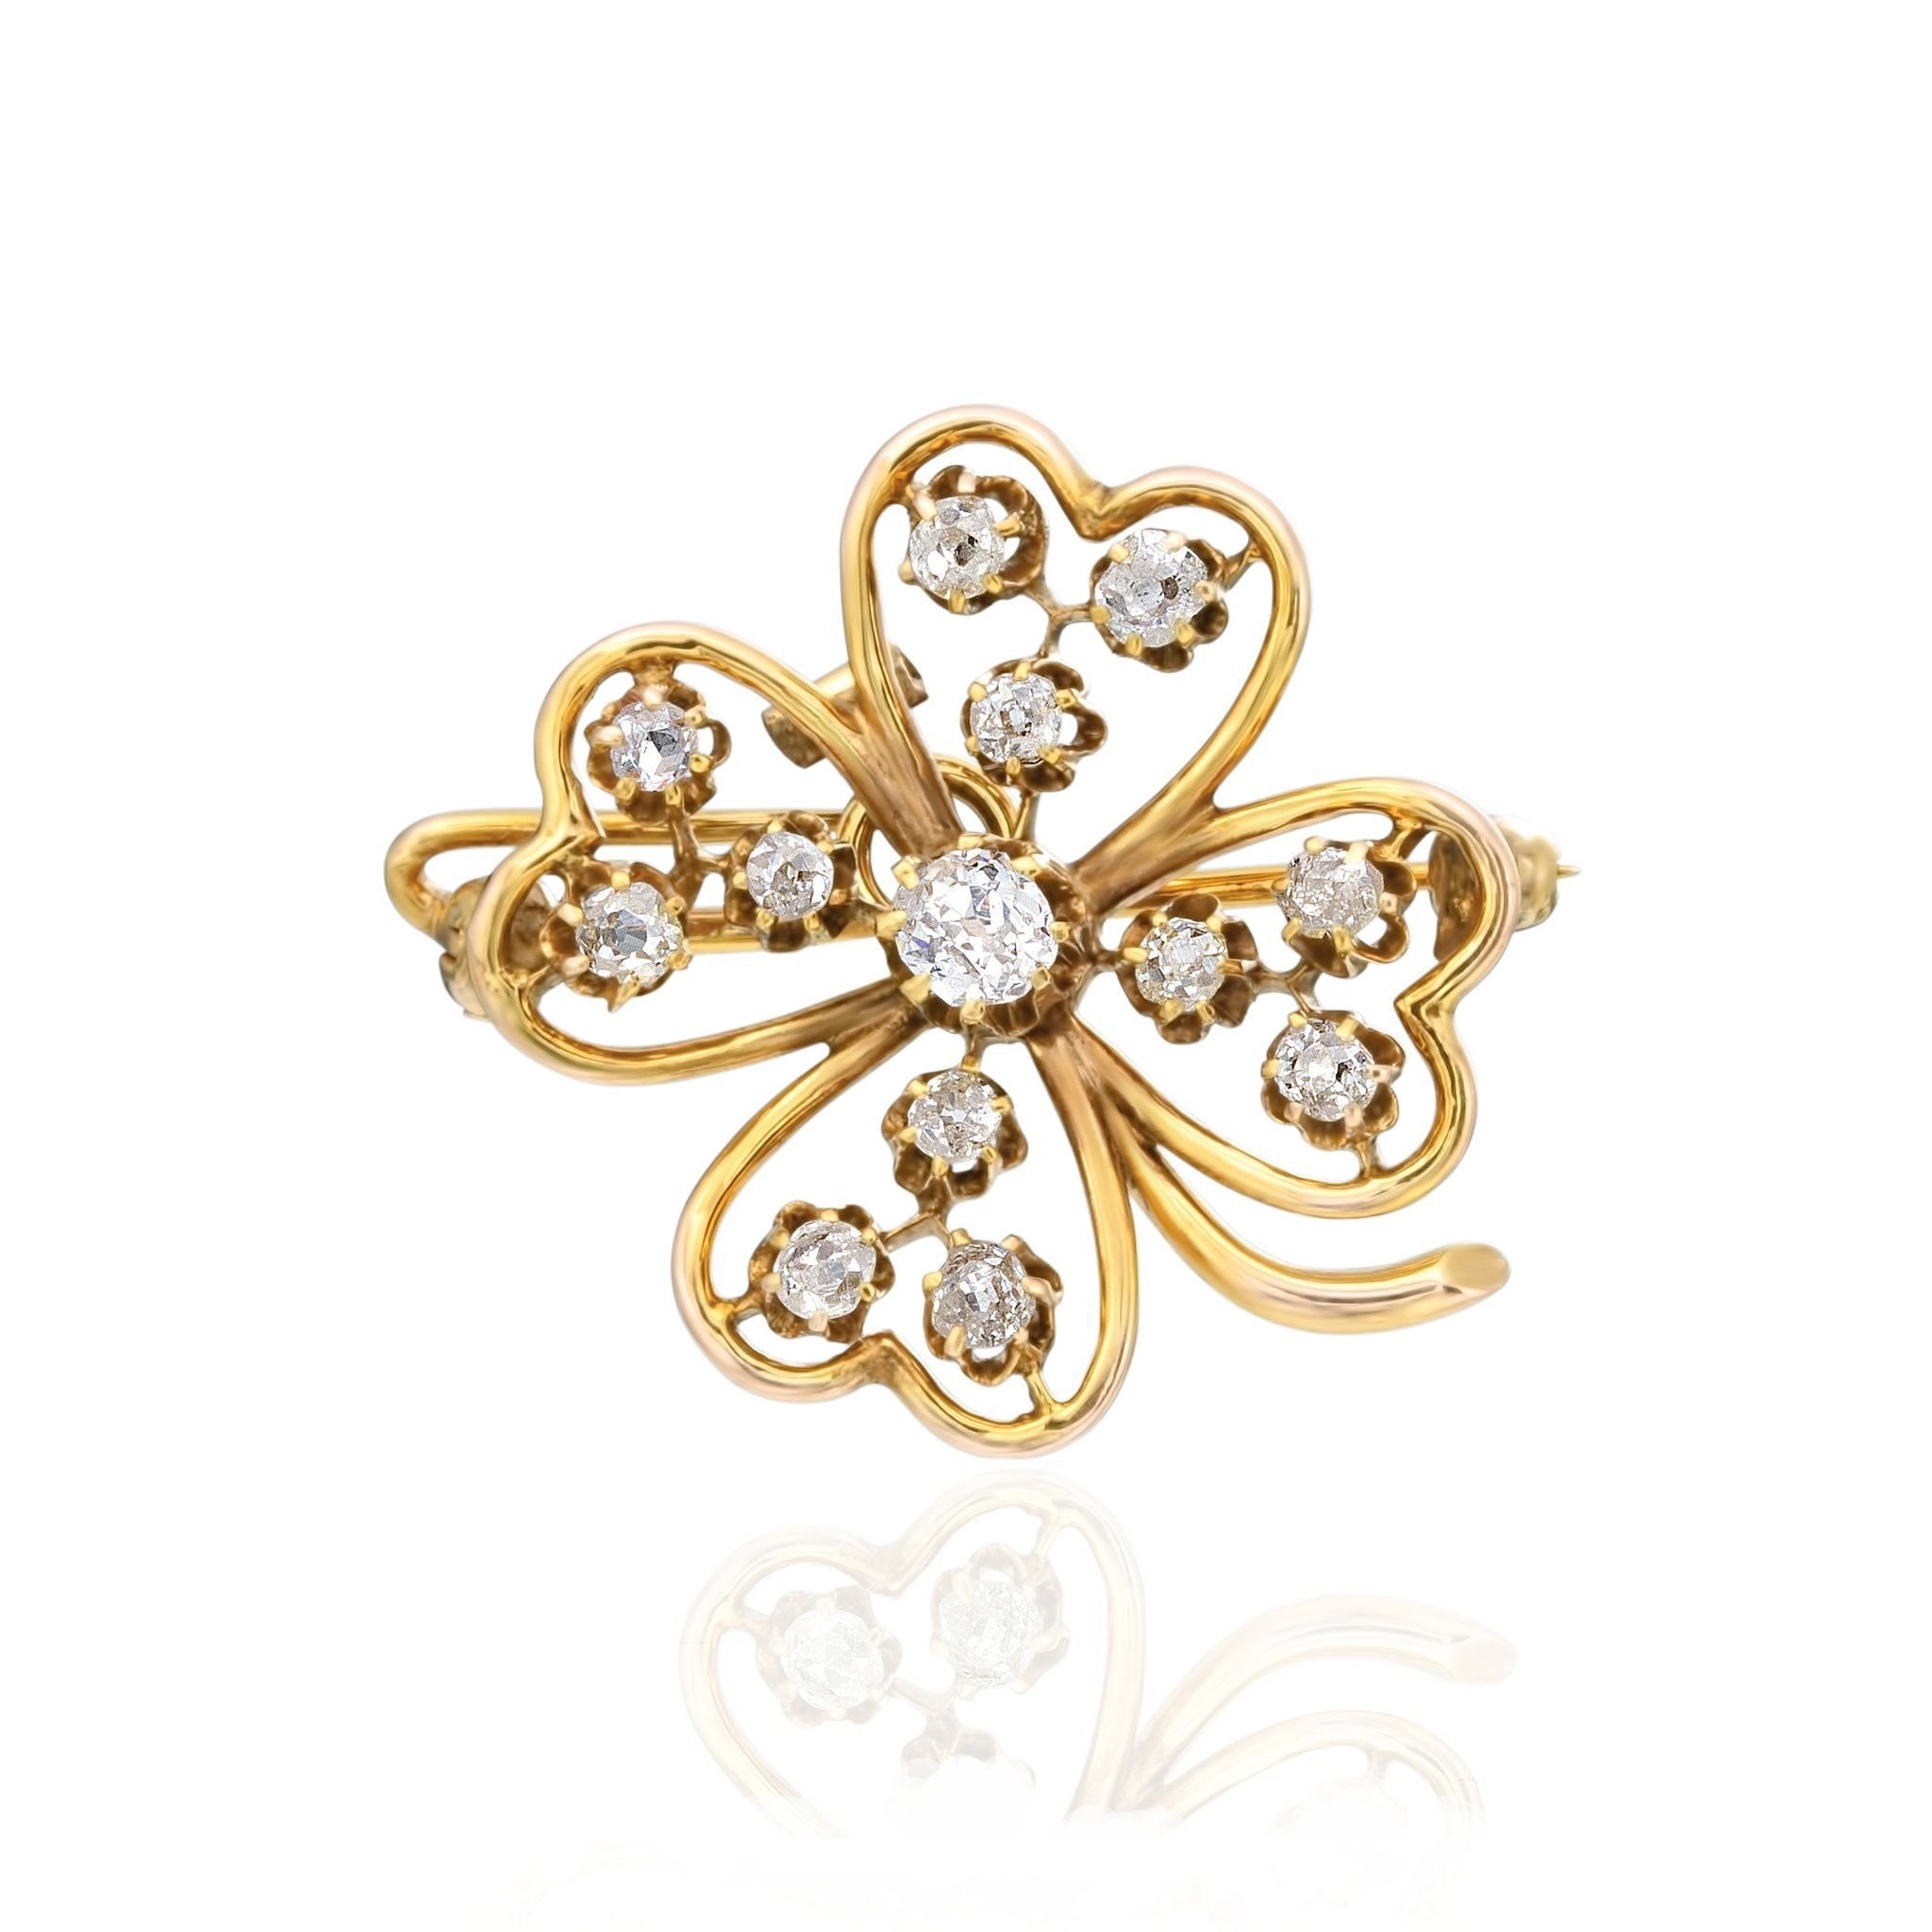 Old Mine Diamond and Gold Clover Brooch